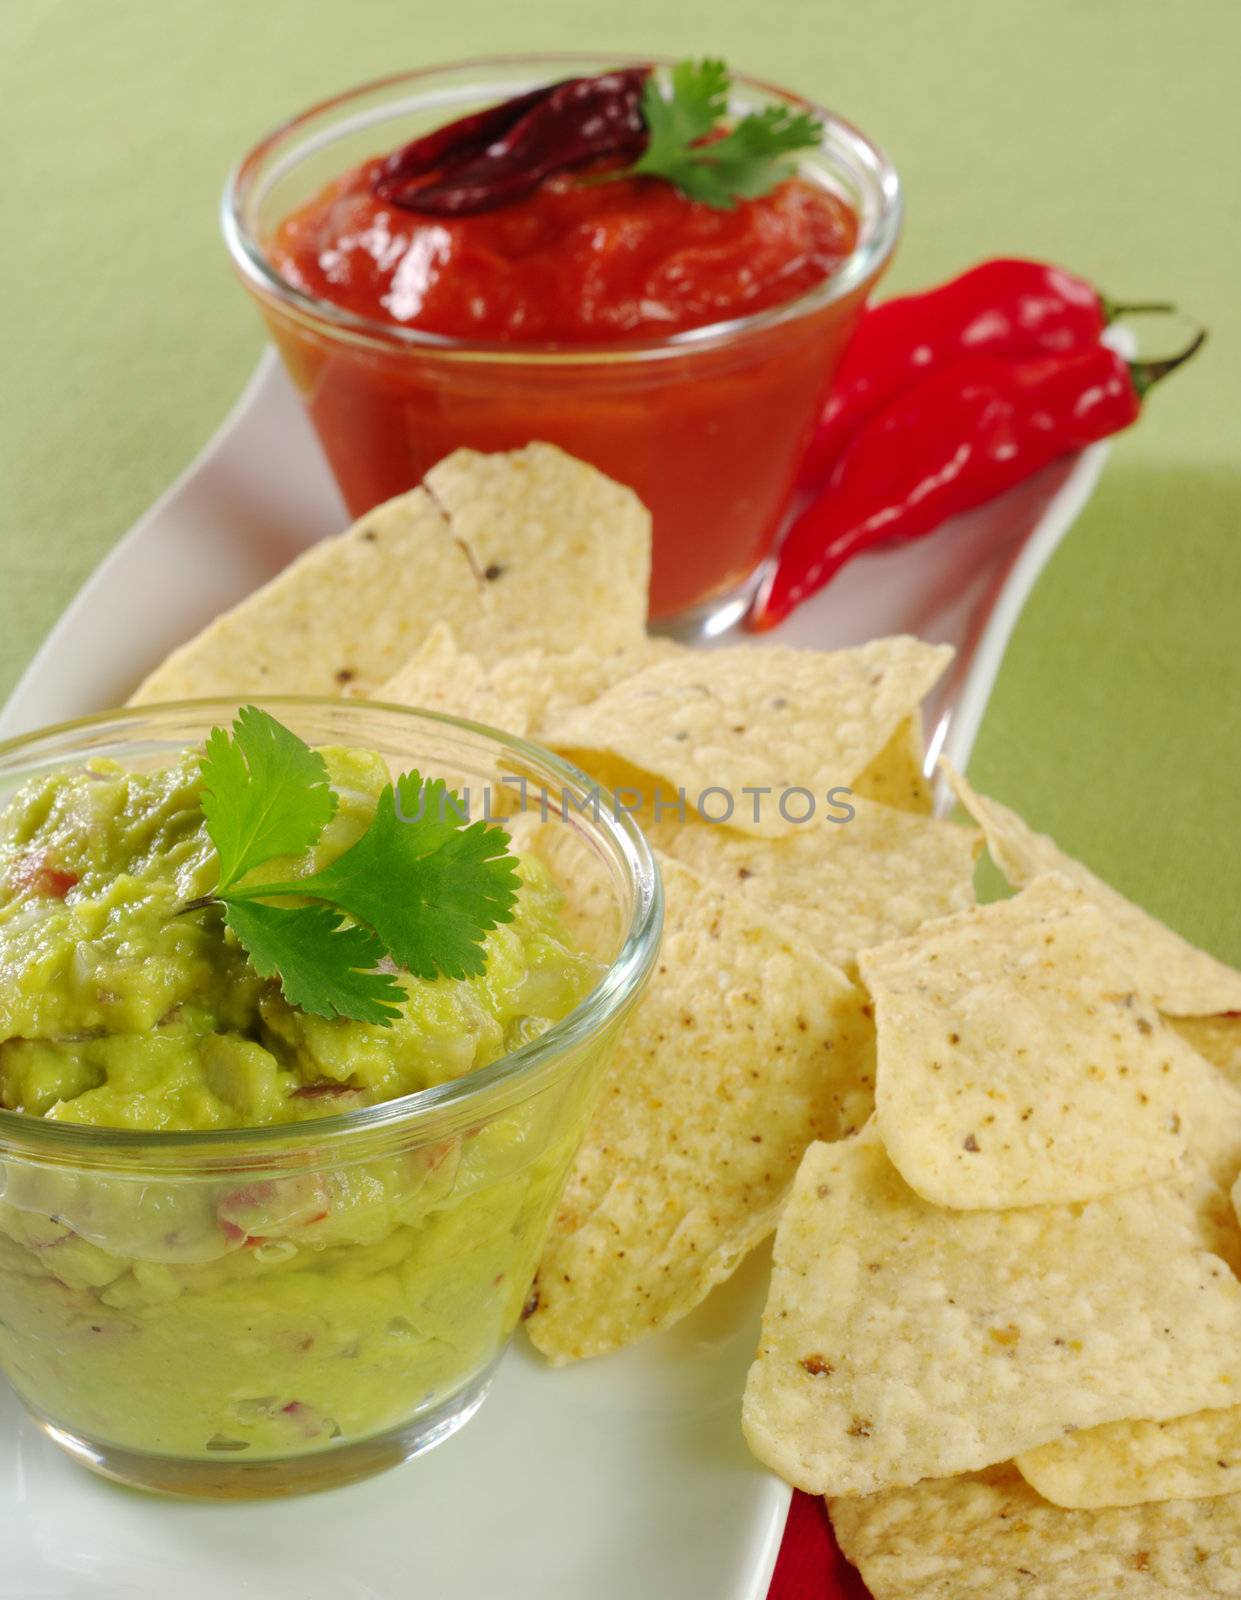 Guacamole with tacos and tomato-chili dip and chilis in the background on green (Selective Focus, Focus on the Guacamole)